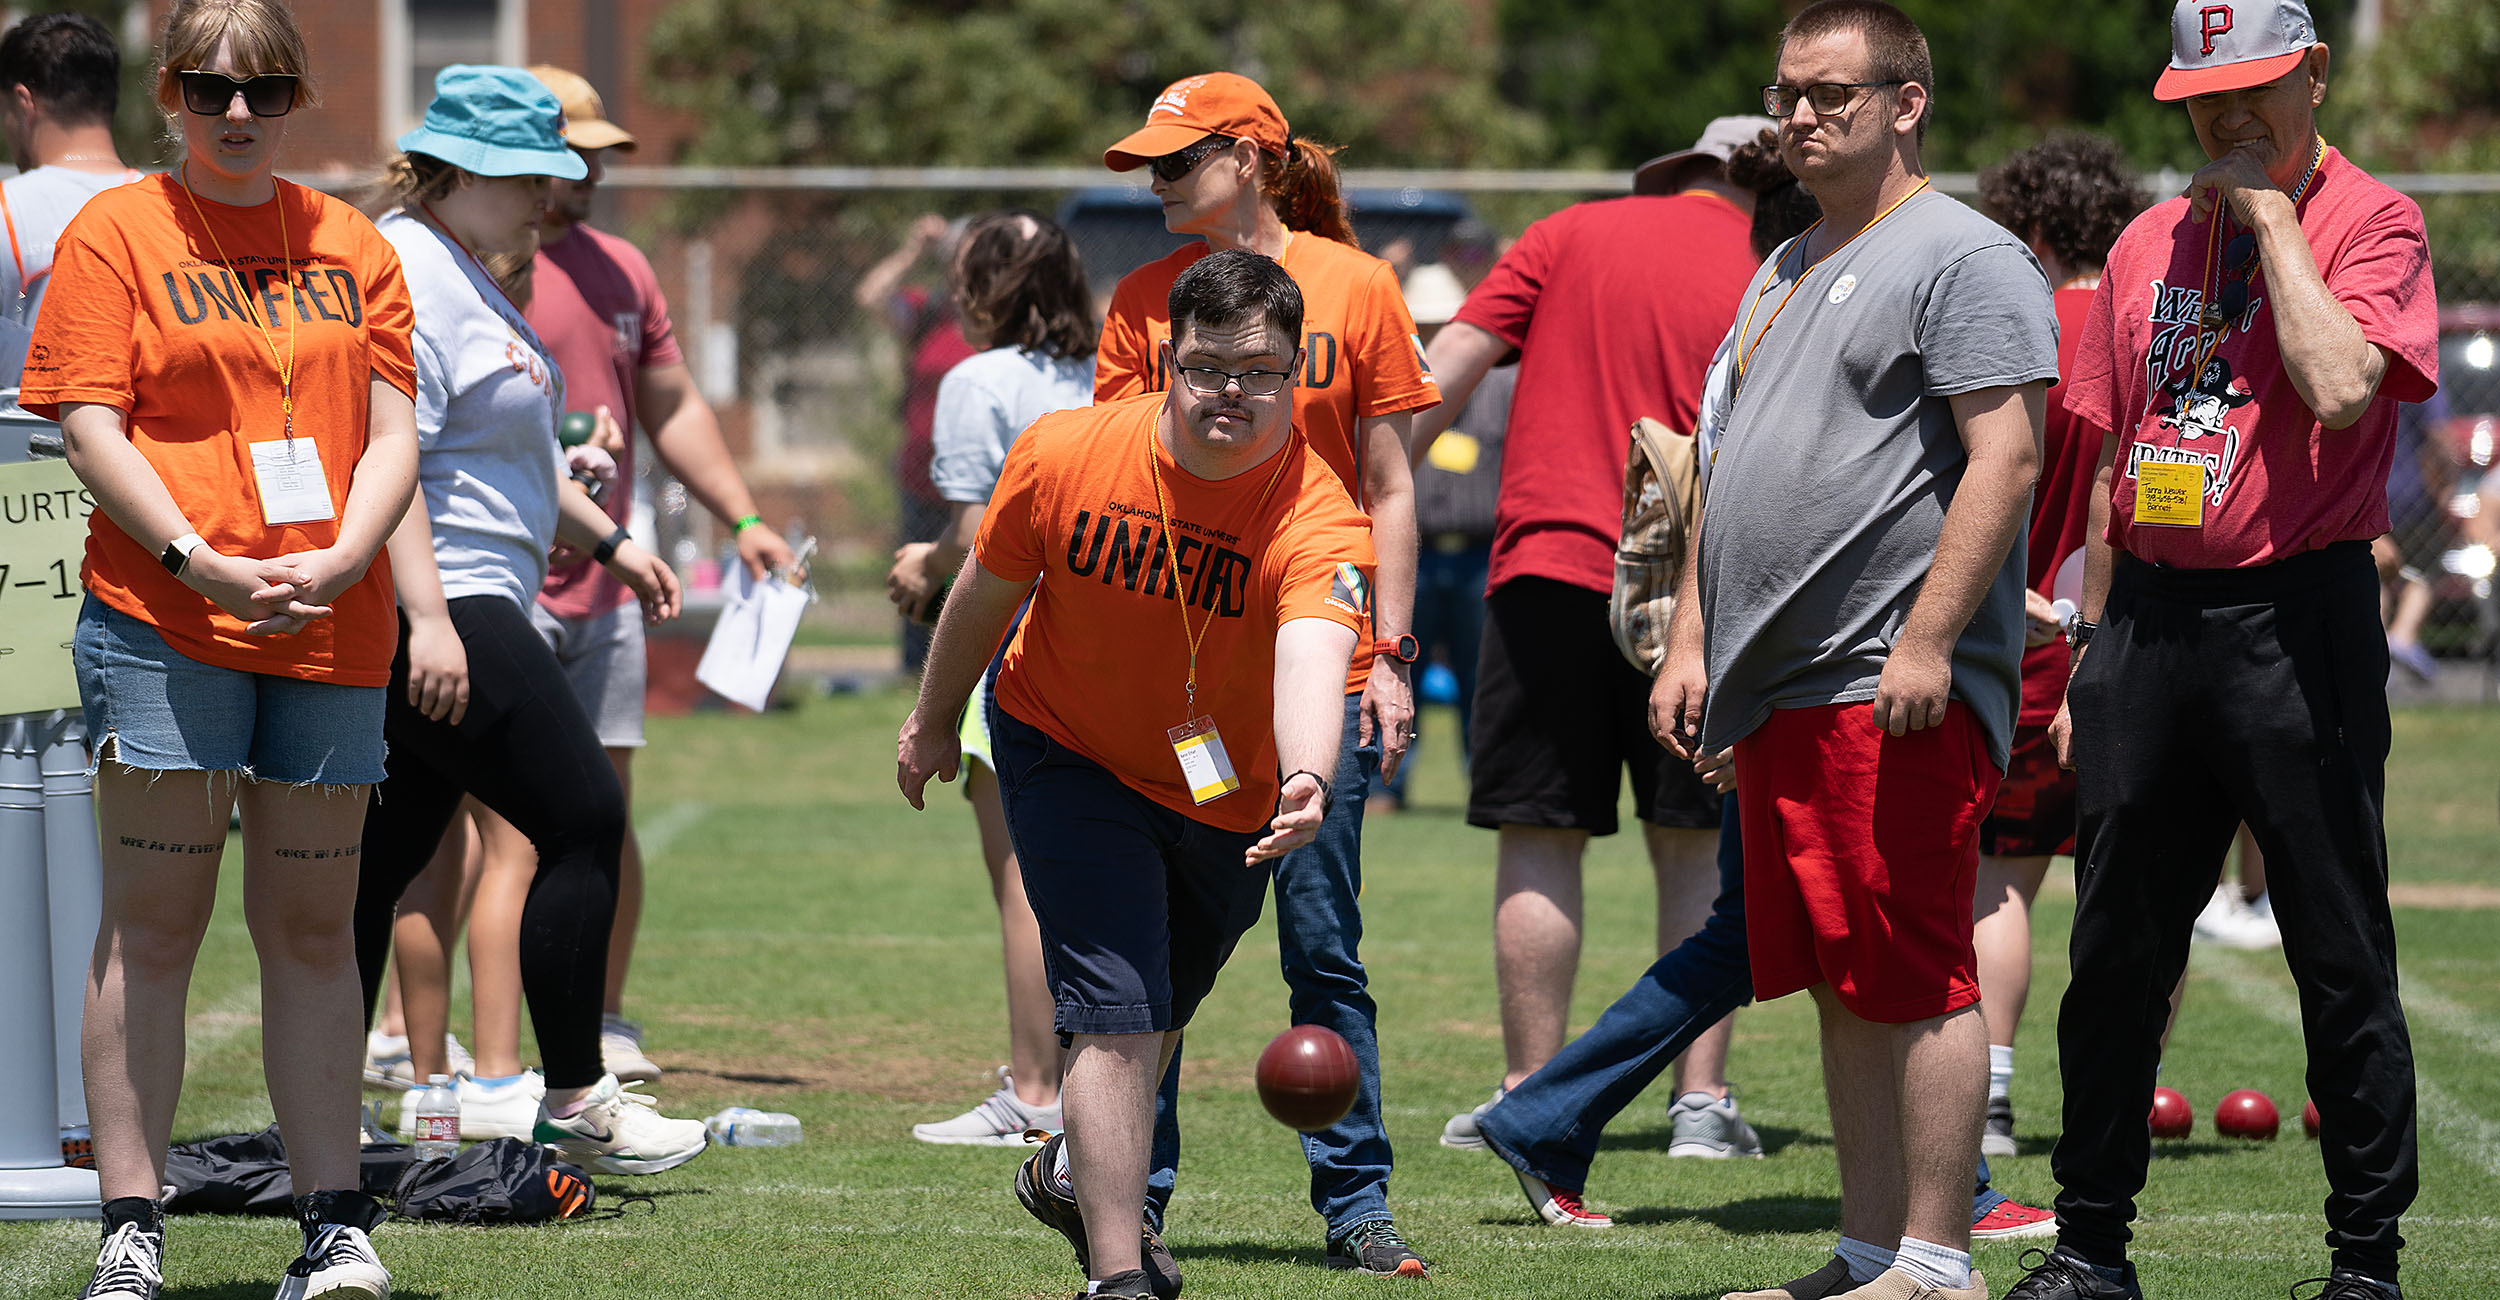 OSU Unified caps inaugural year with Special Olympics Summer Games